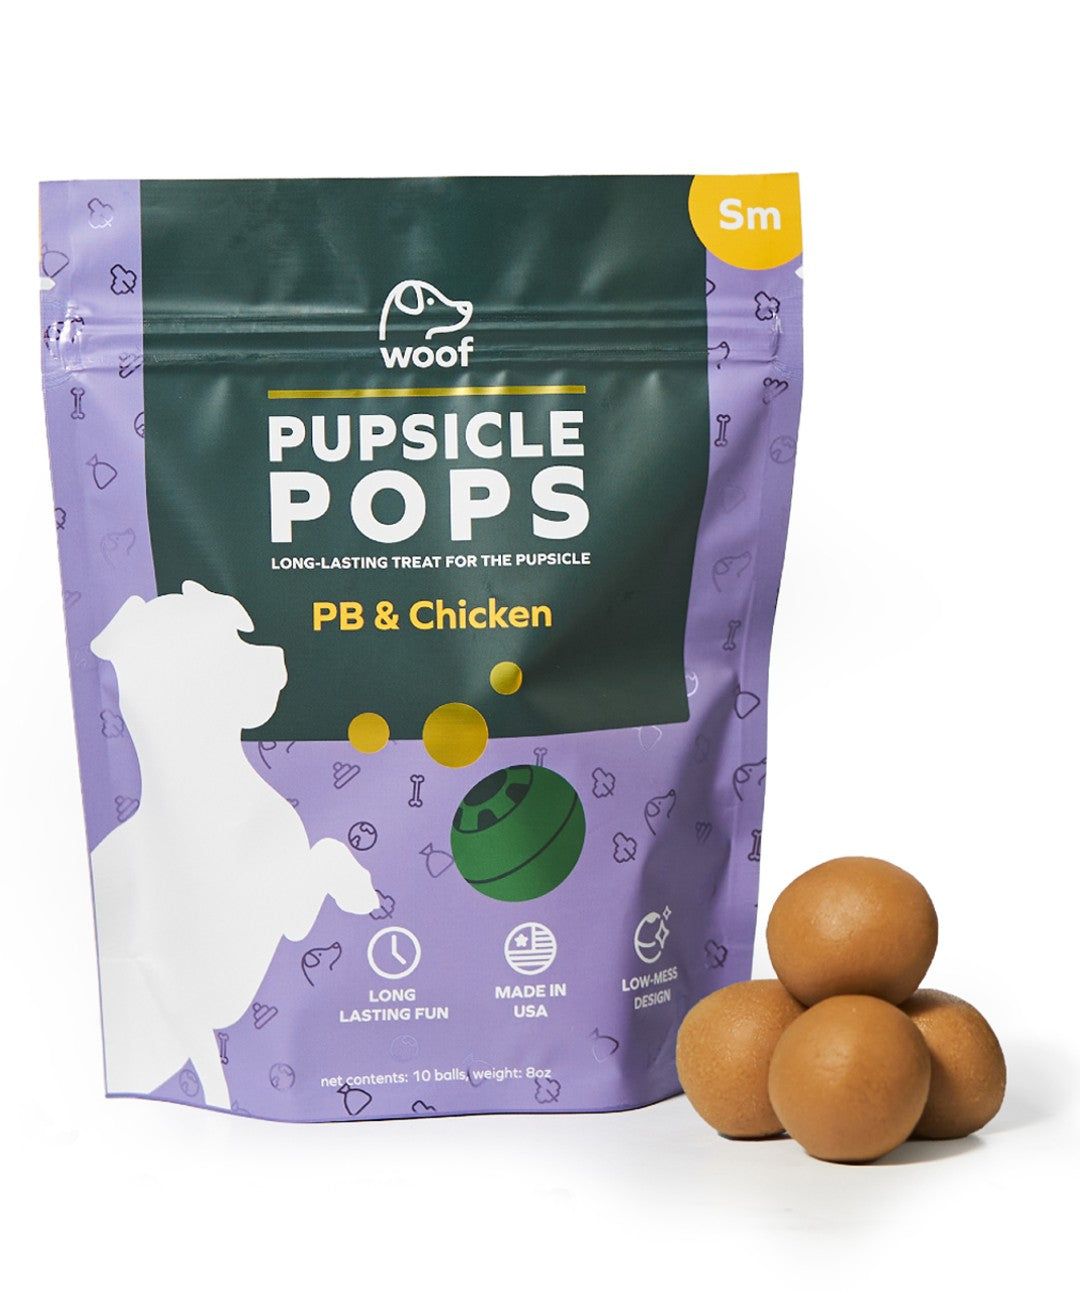 Replying to @adamm3911 Pupsicle pops are made of natural ingredients l, Dog Popsicles